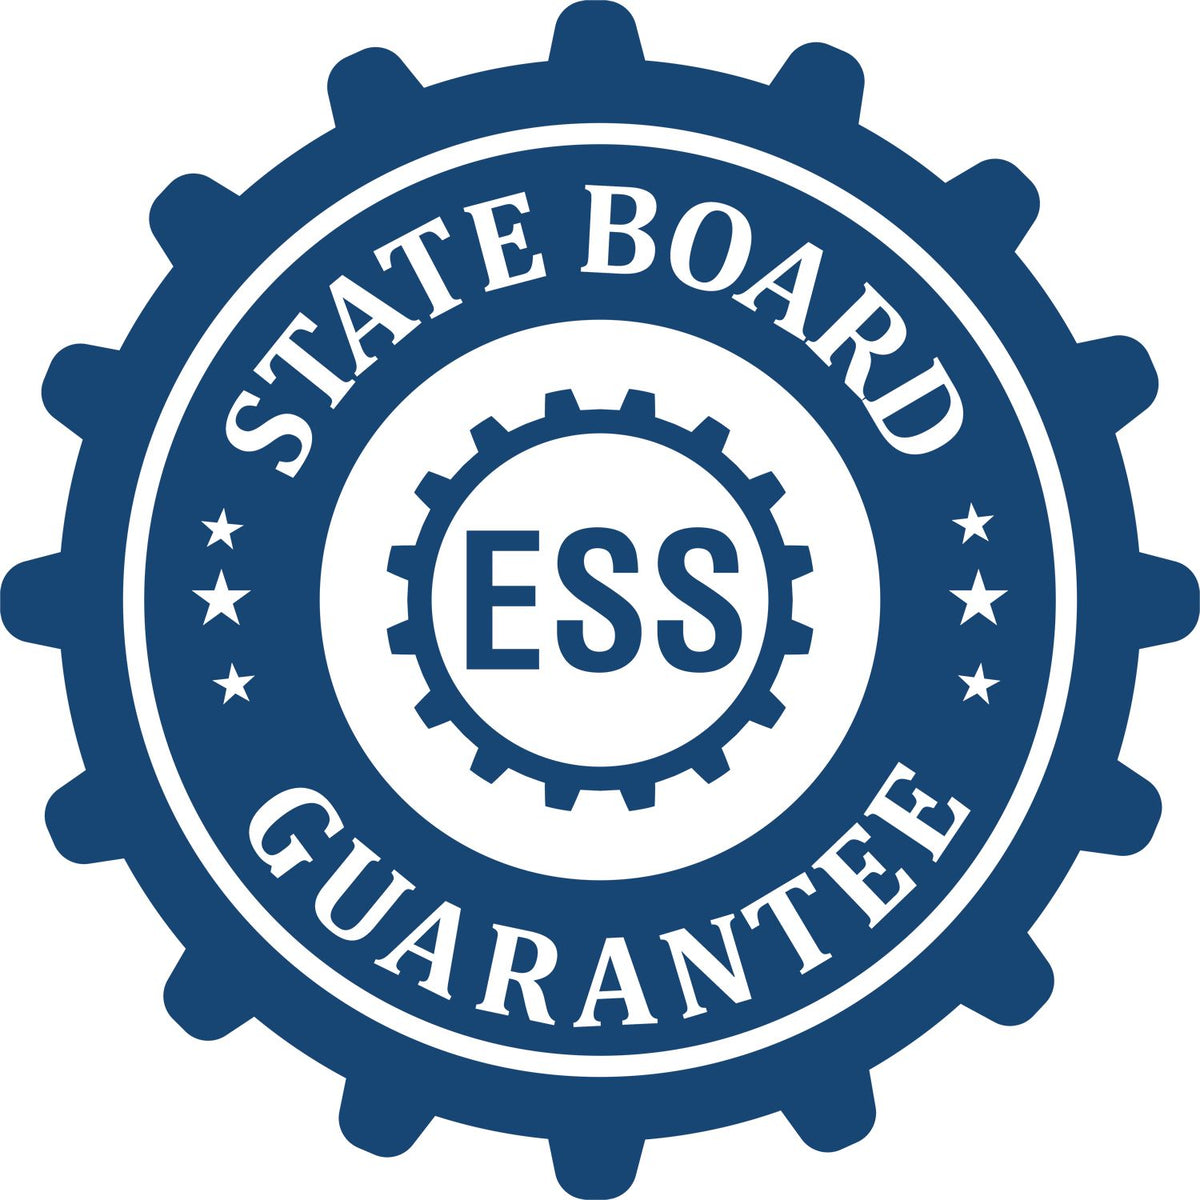 An emblem in a gear shape illustrating a state board guarantee for the Virginia Geologist Desk Seal